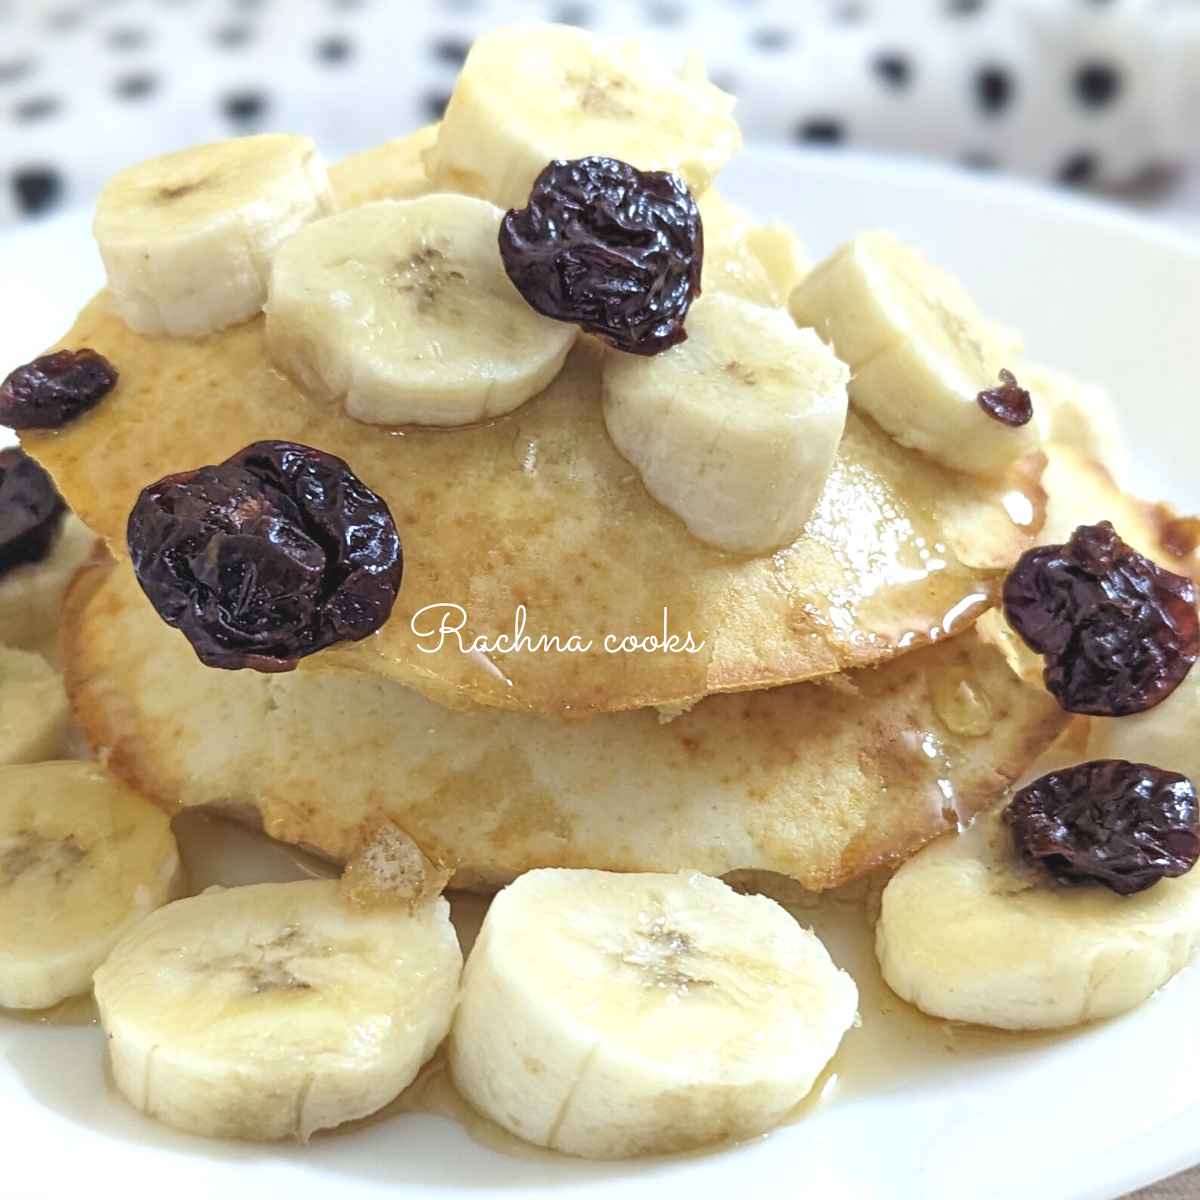 Two air fryer pancakes with a drizzle of maple syrup, cut bananas and cherries.